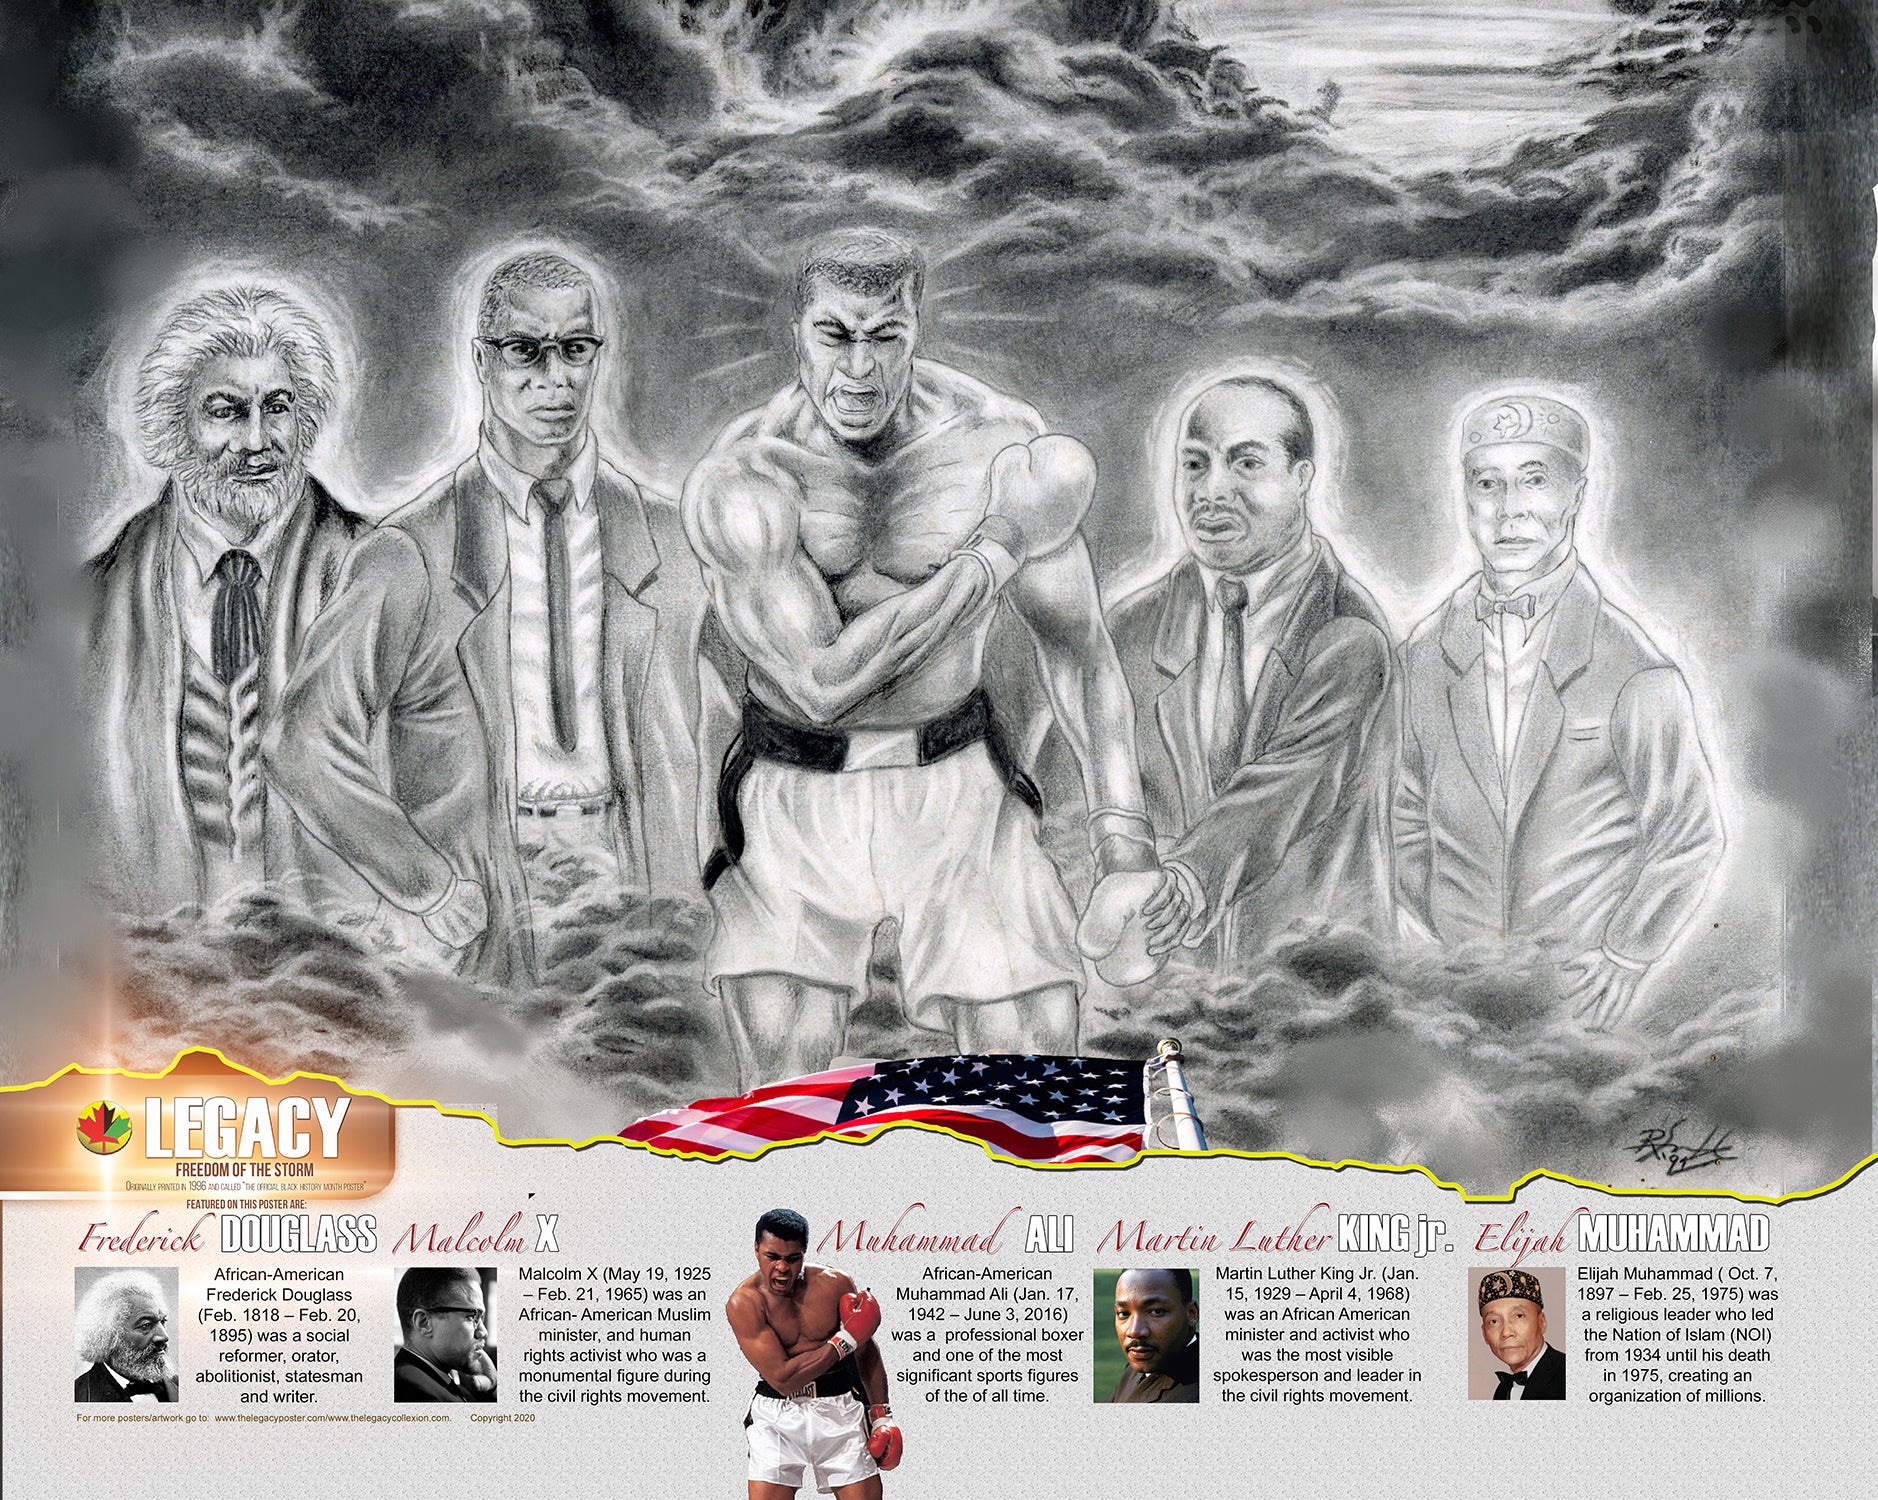 LEGACY Poster (1996): Freedom of the Storm